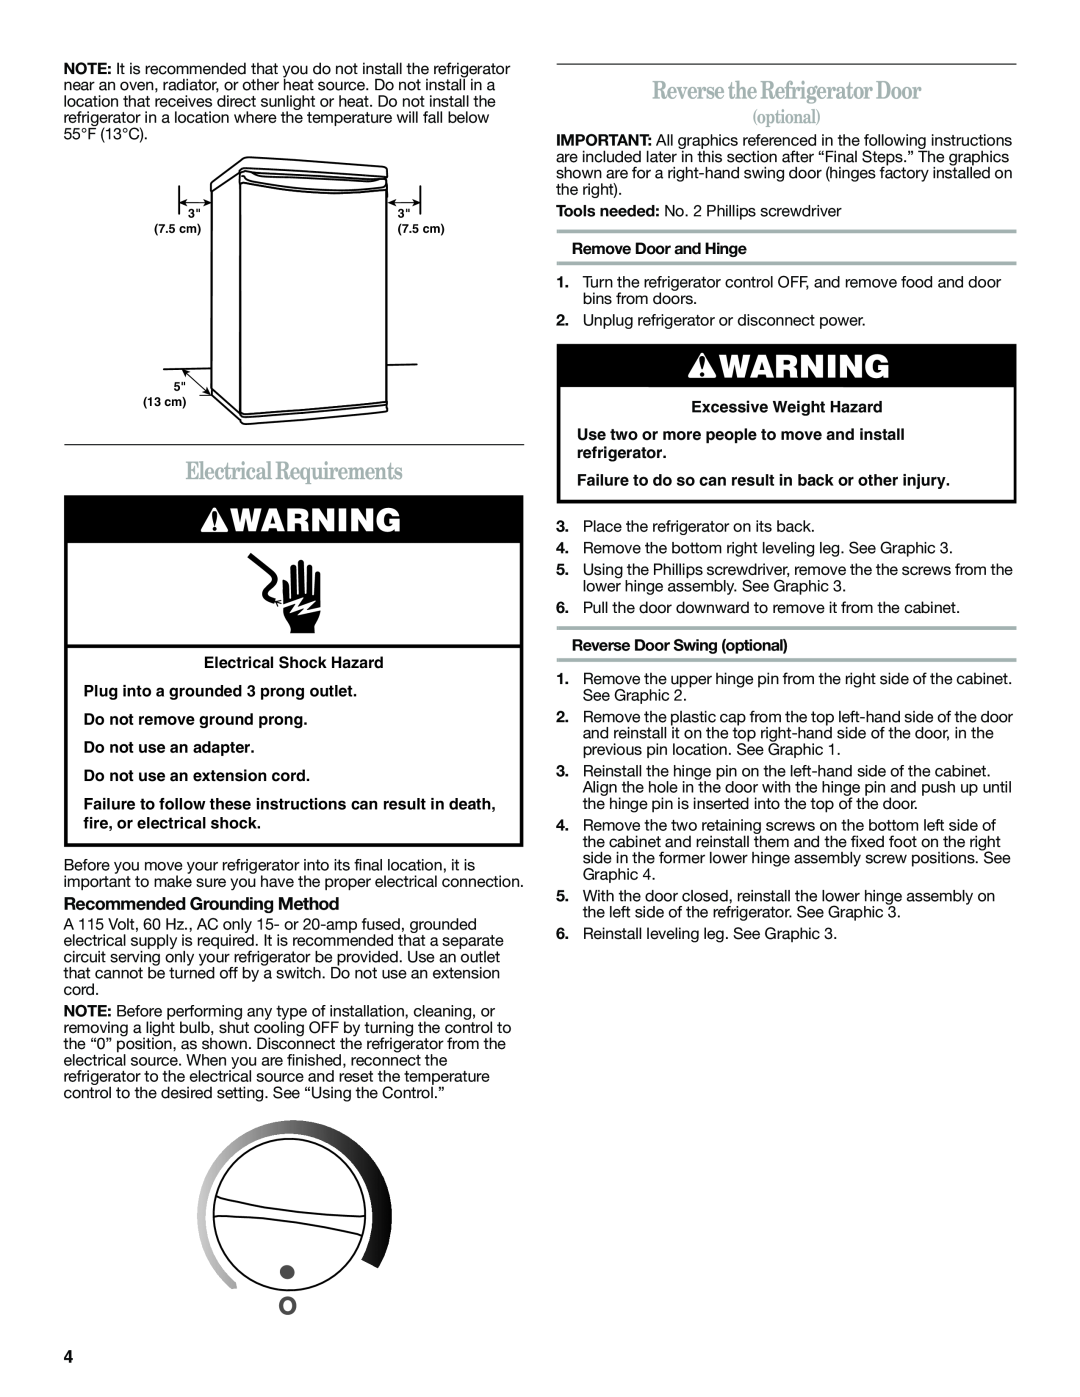 Whirlpool WAR449W manual Electrical Requirements, Reverse the Refrigerator Door, optional, Recommended Grounding Method 